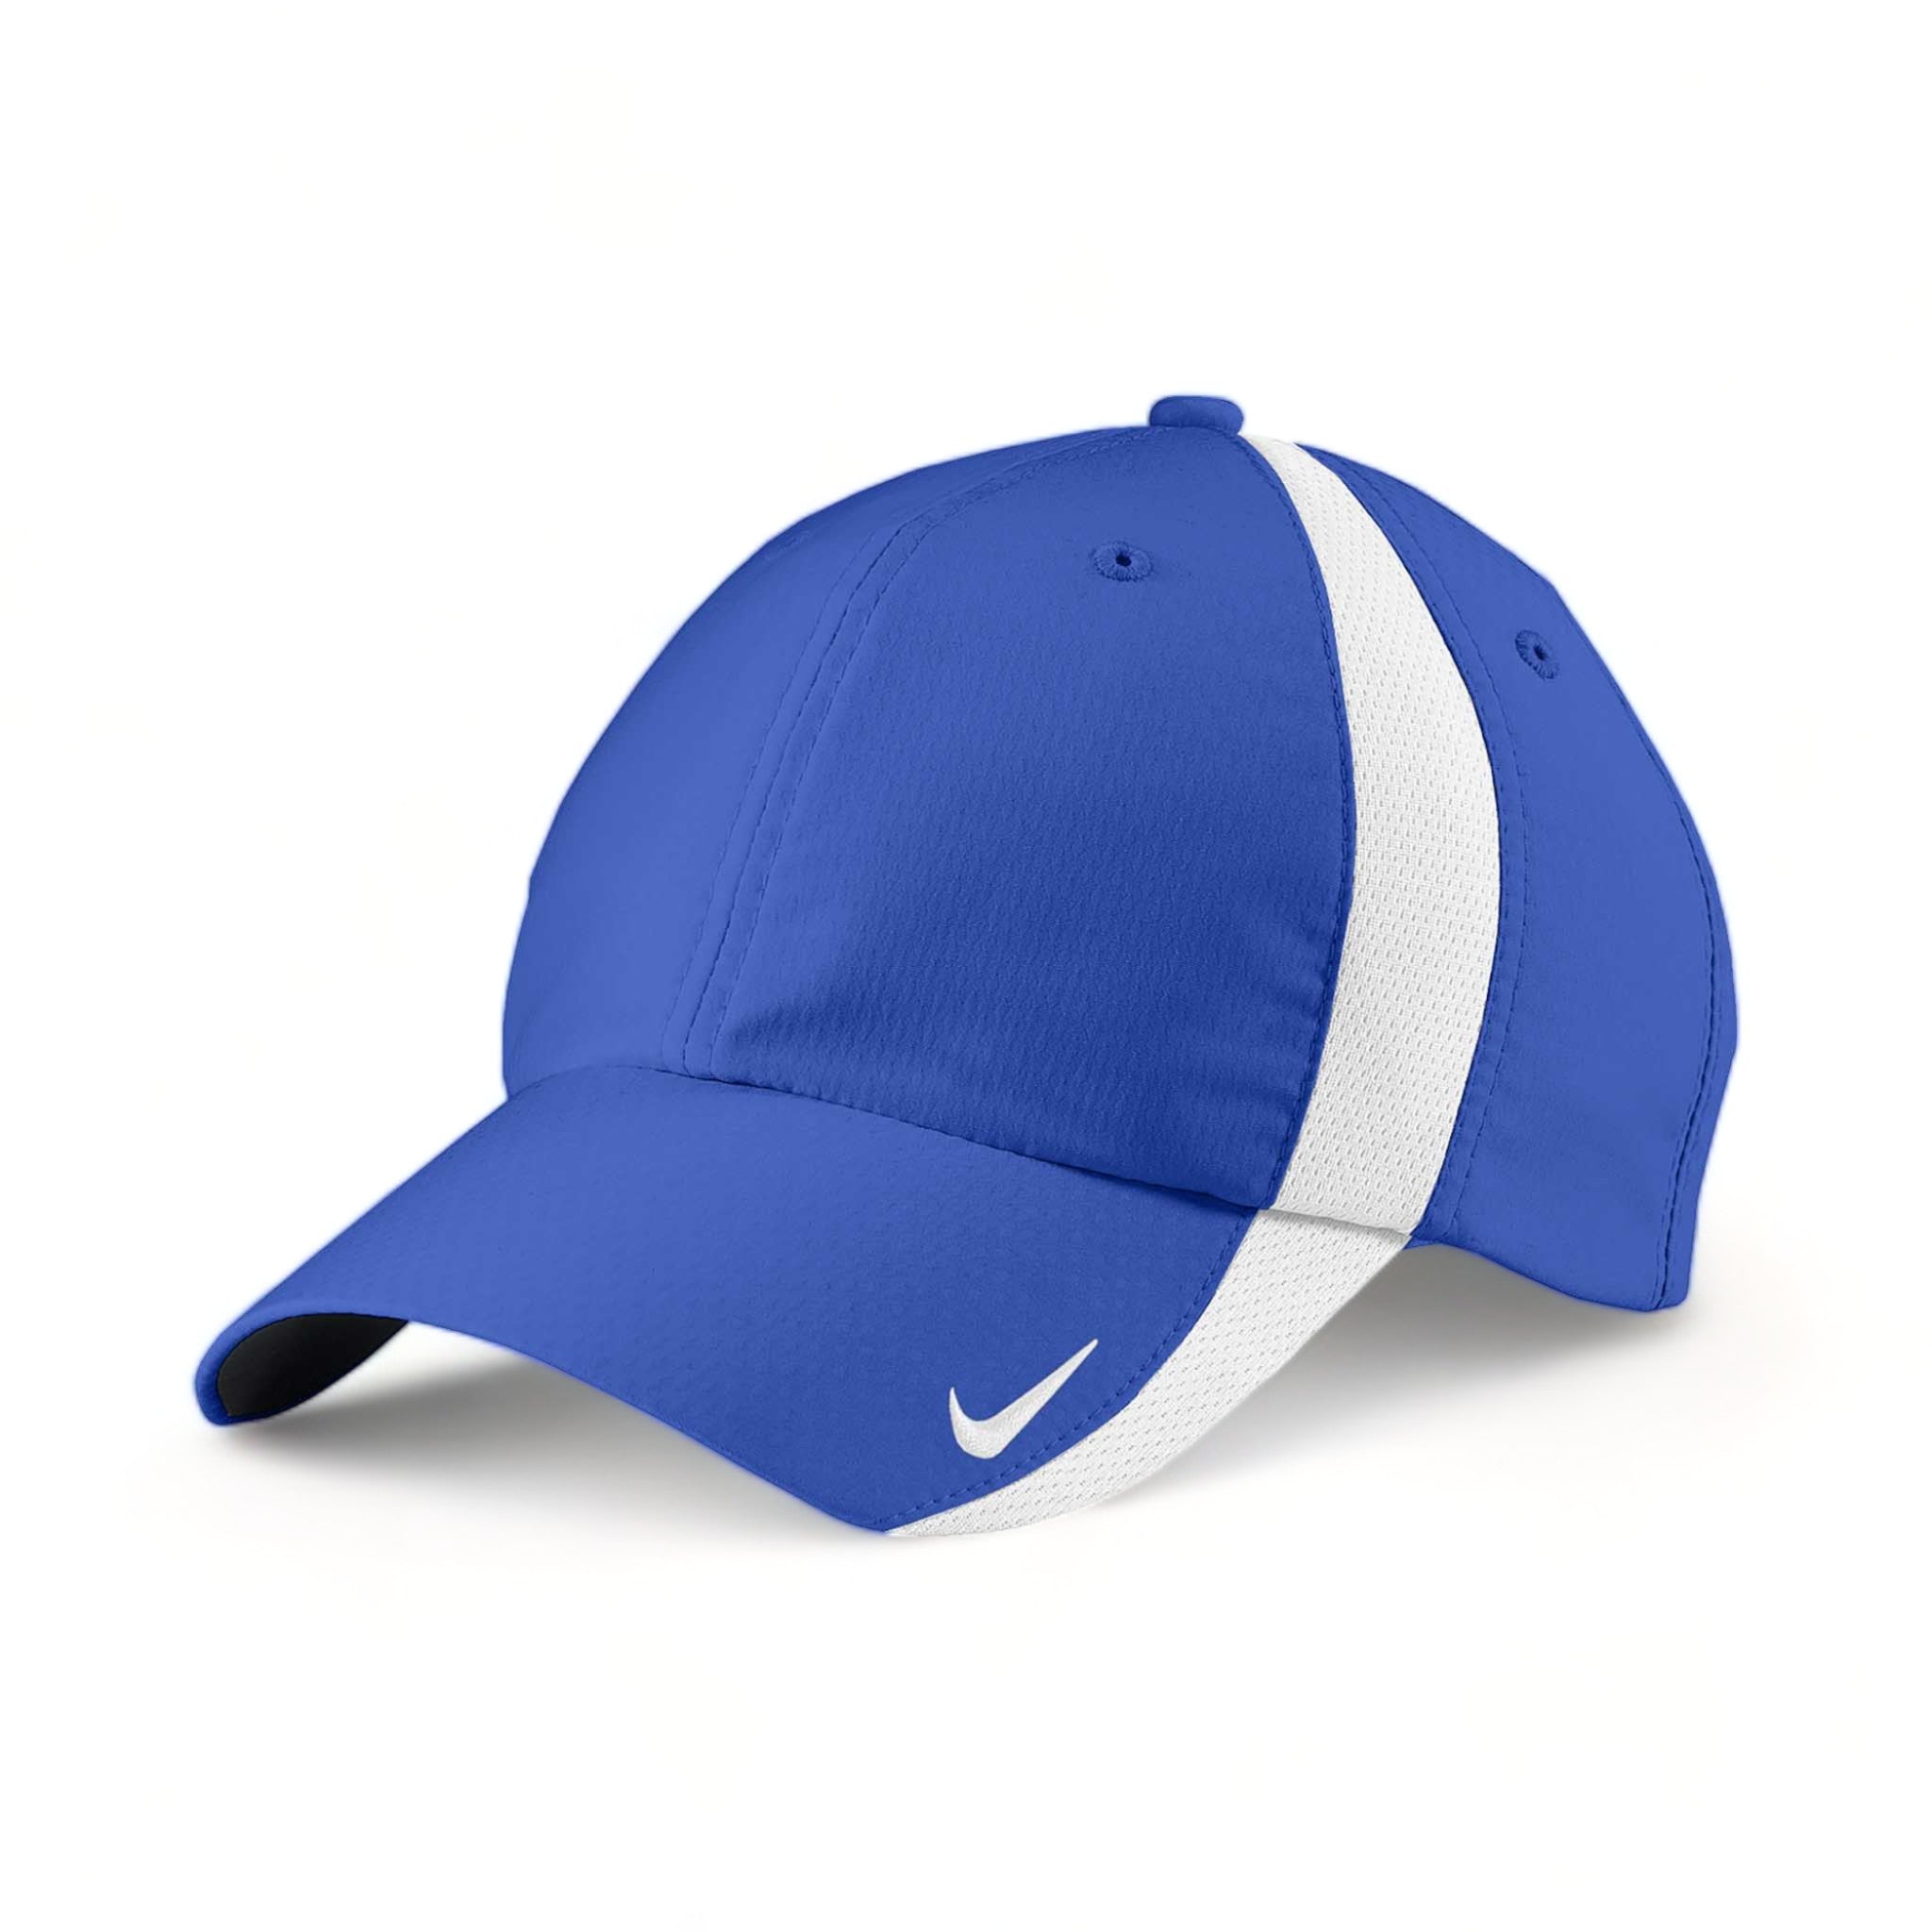 Side view of Nike NKFD9709 custom hat in game royal and white